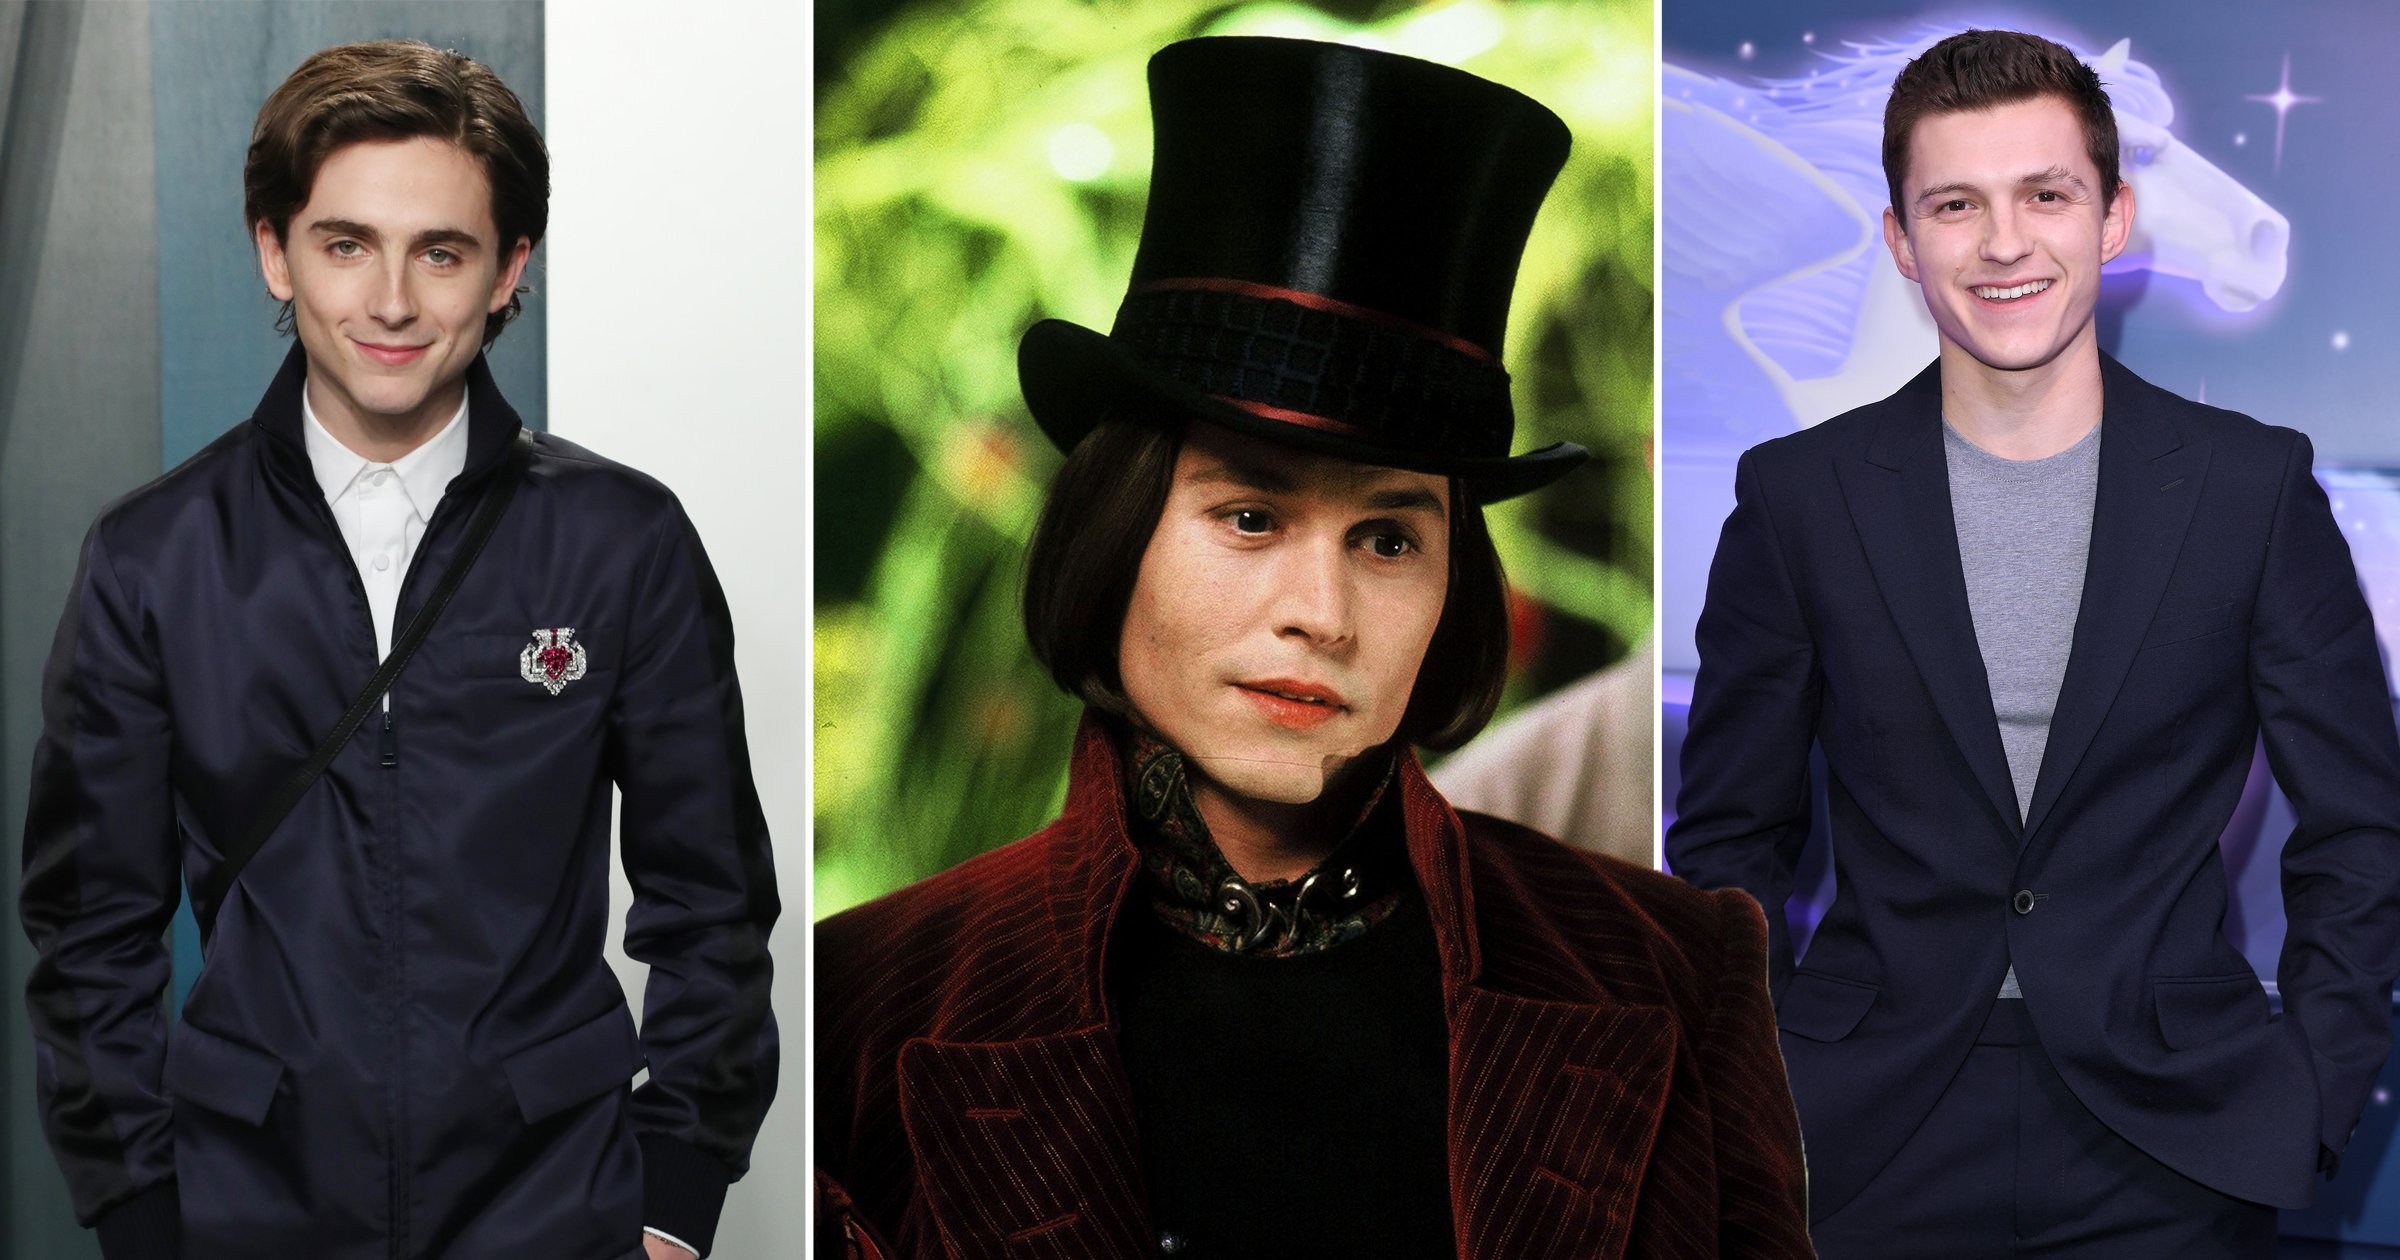 Willy Wonka prequel set for 2023 release as Warner Bros ‘eyes Timothee Chalamet and Tom Holland’